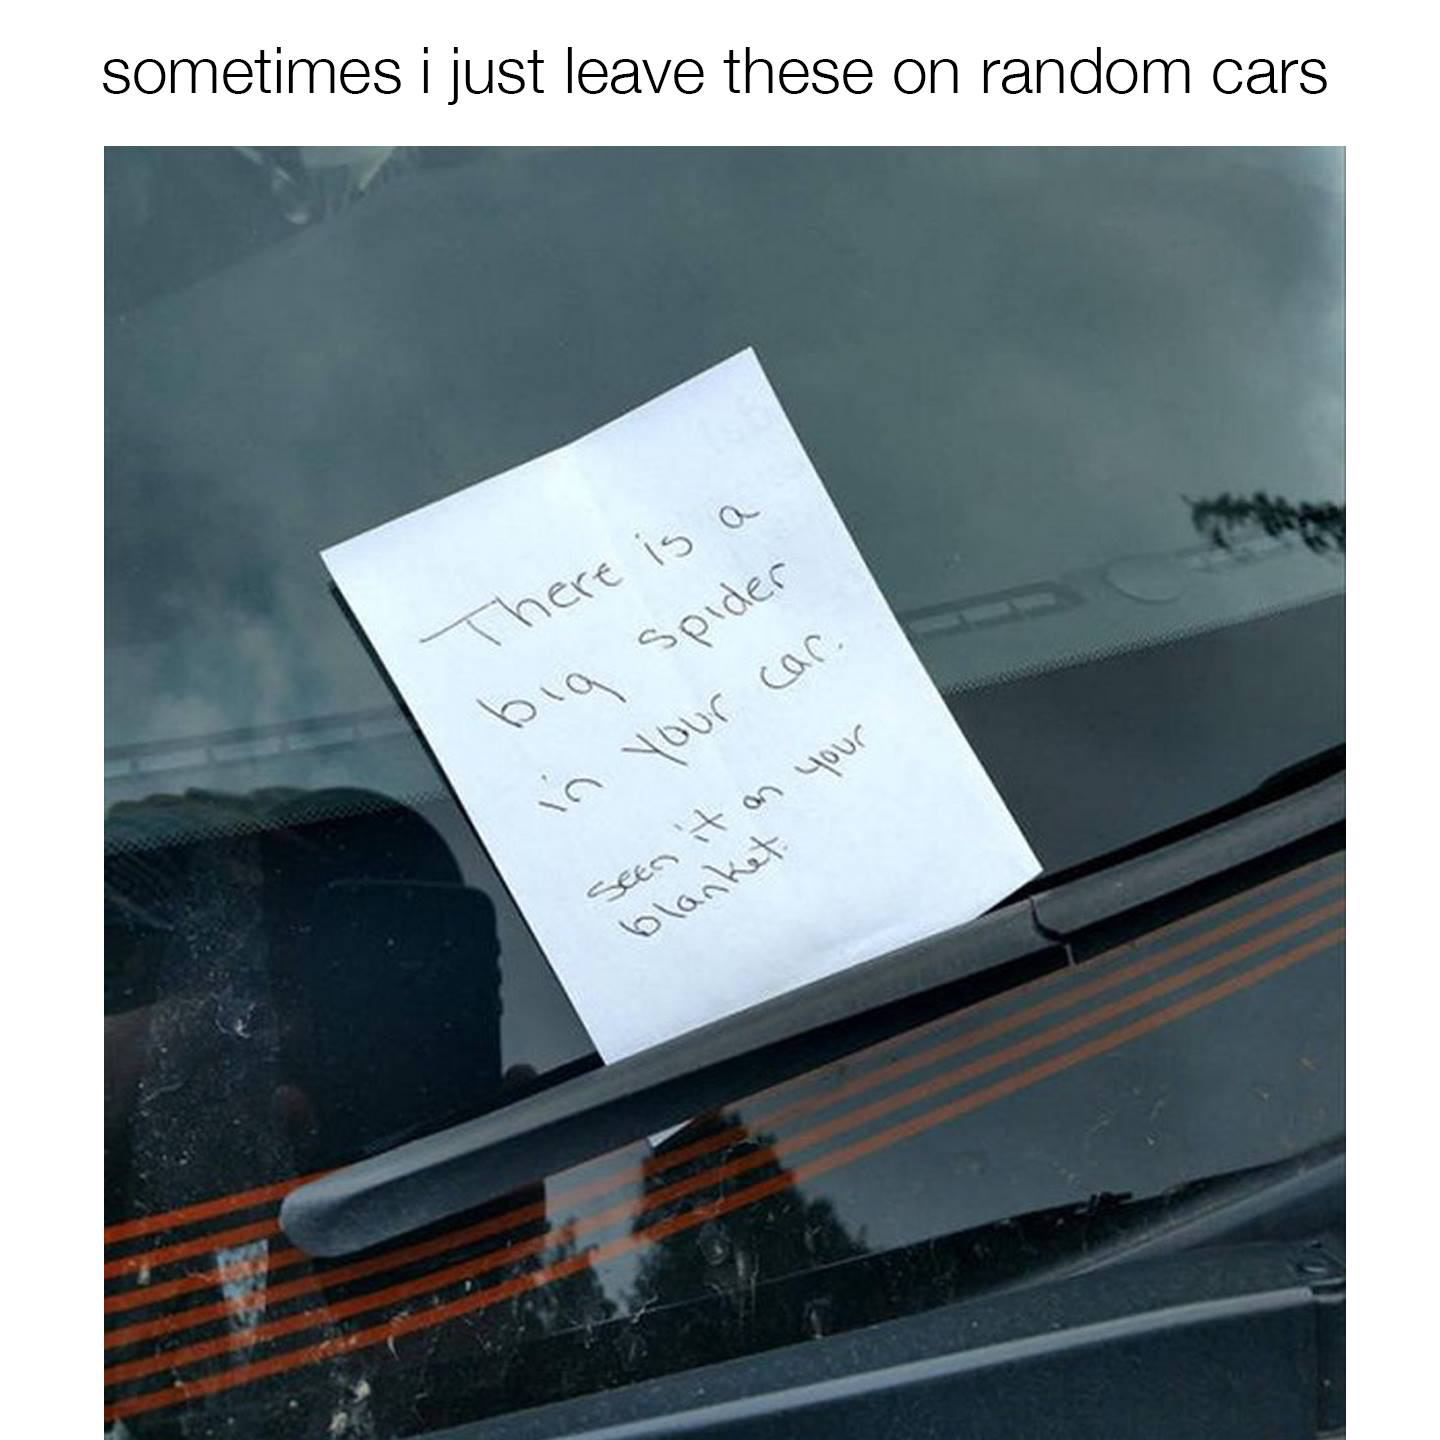 ruin someone's day meme - sometimes i just leave these on random cars There is a big spider in your car. seen it on your